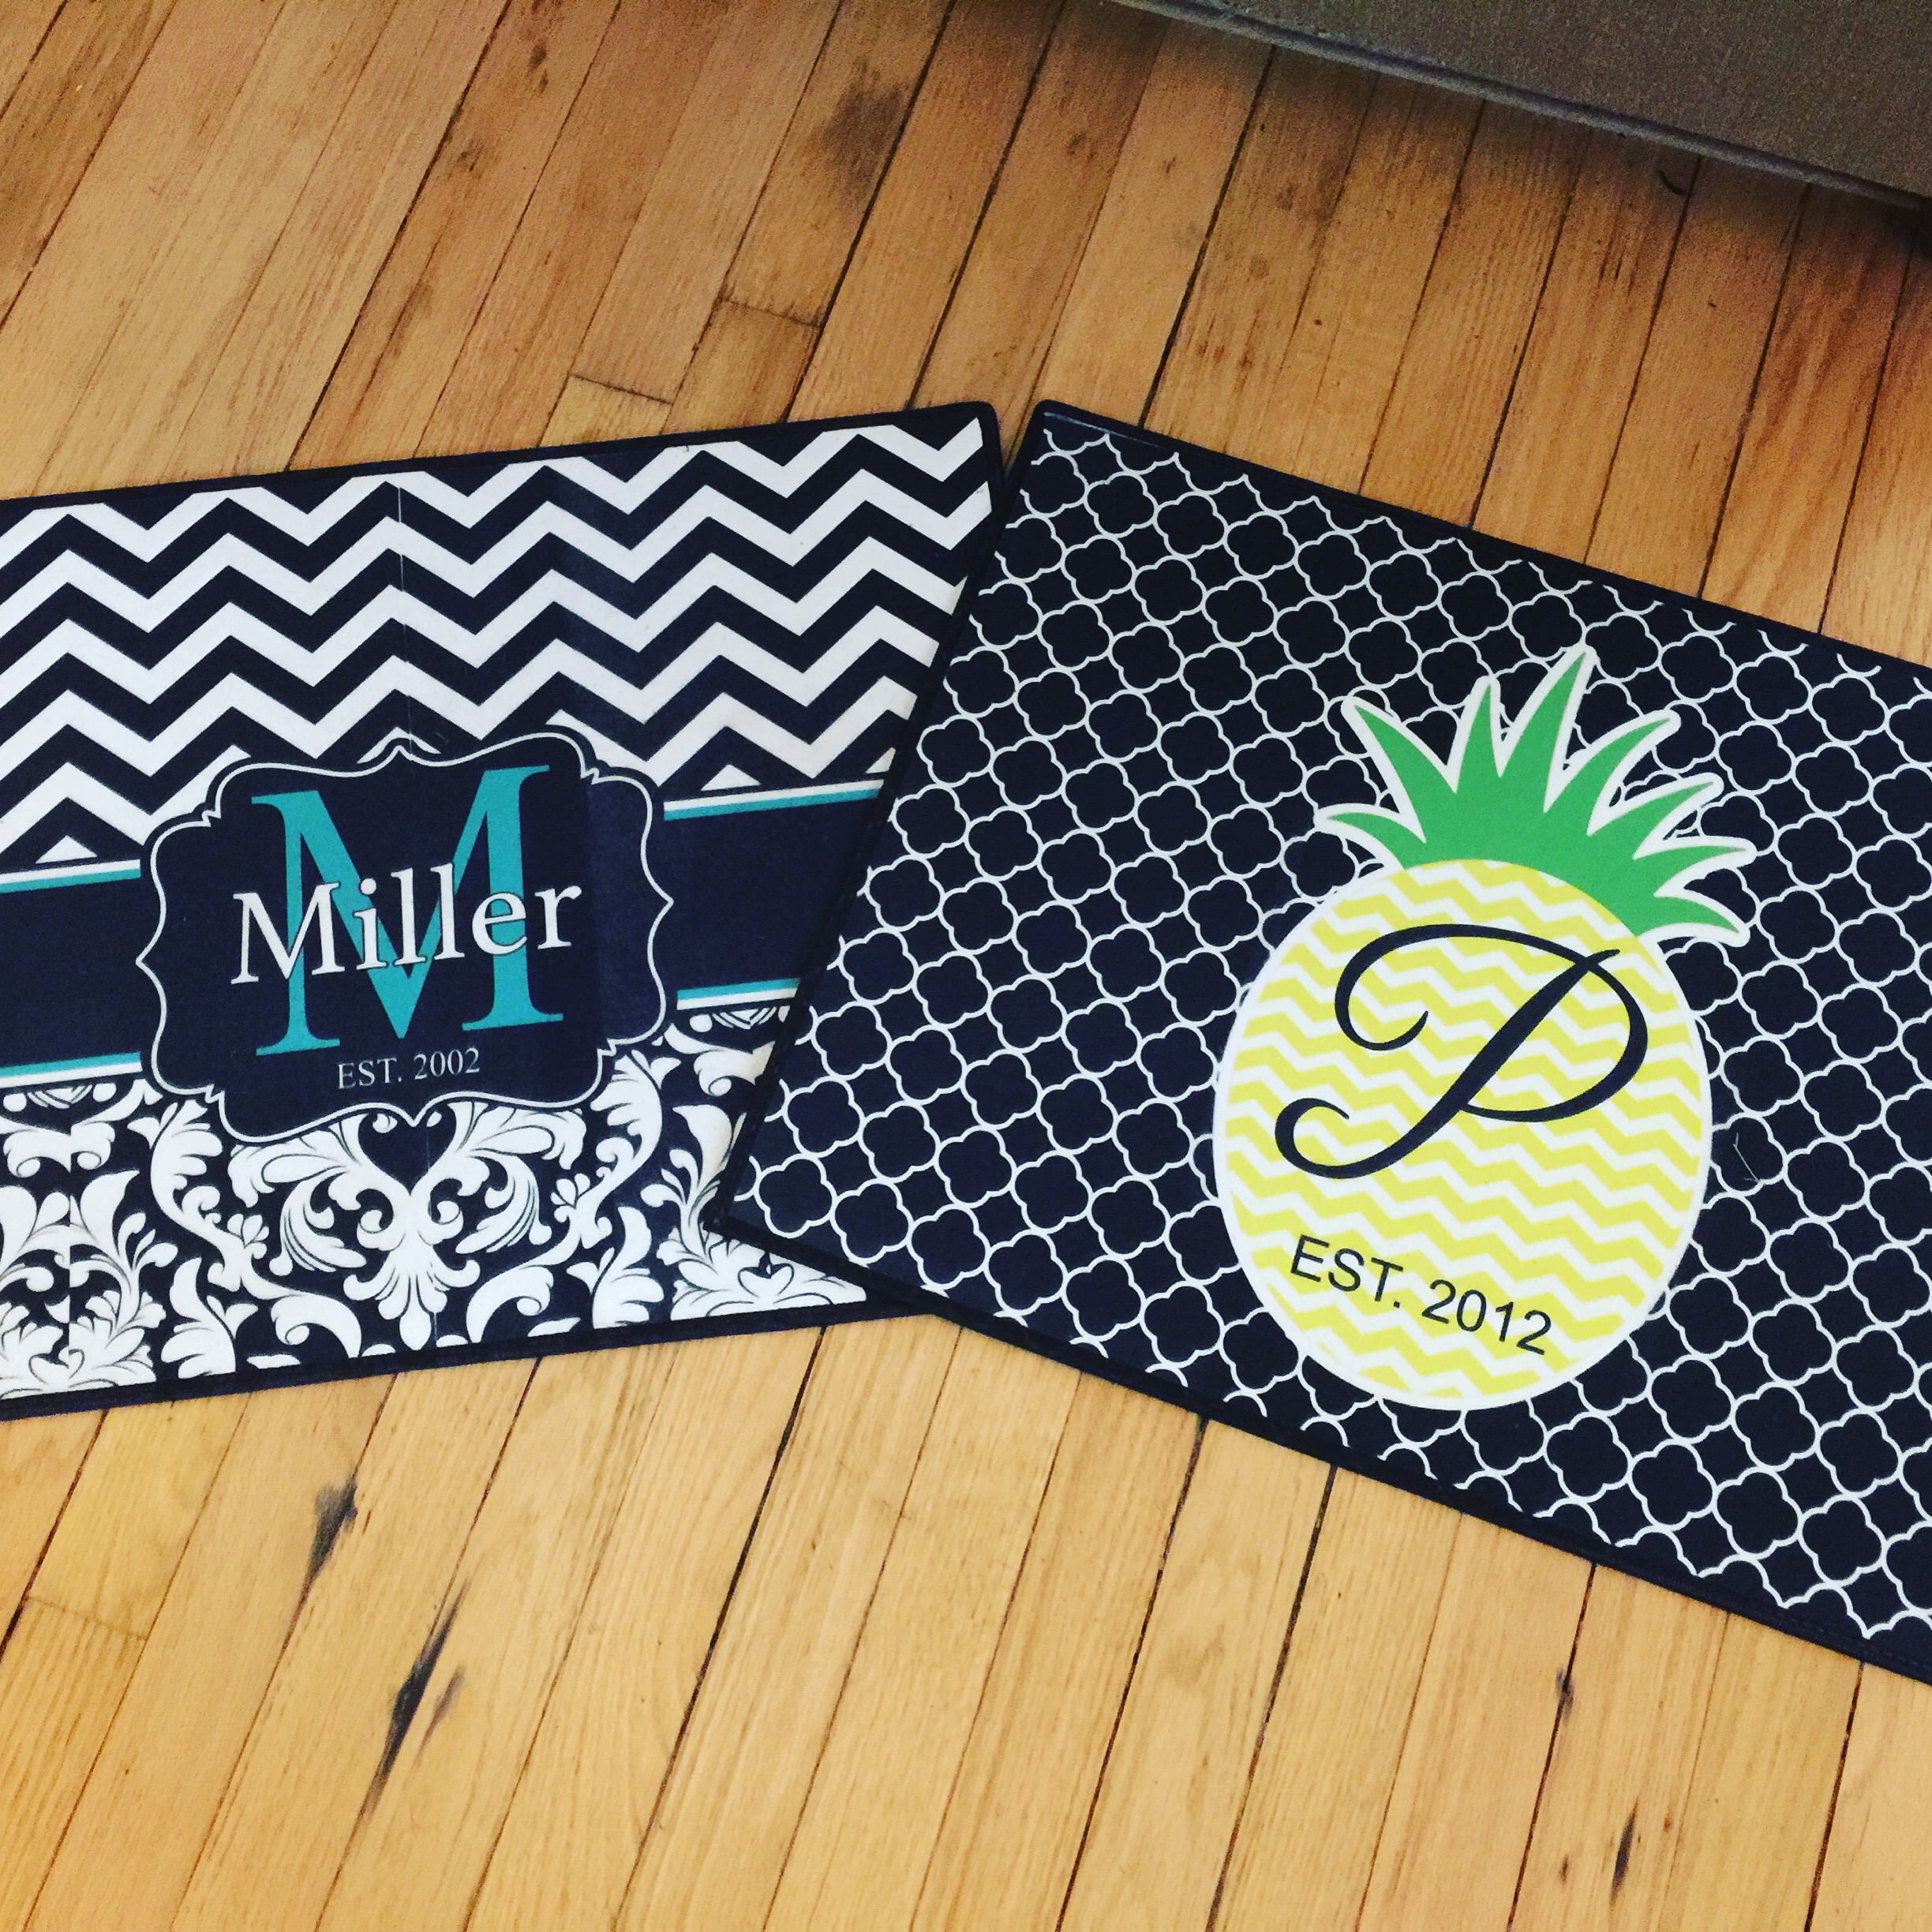 Personalized Door mats made with sublimation printing